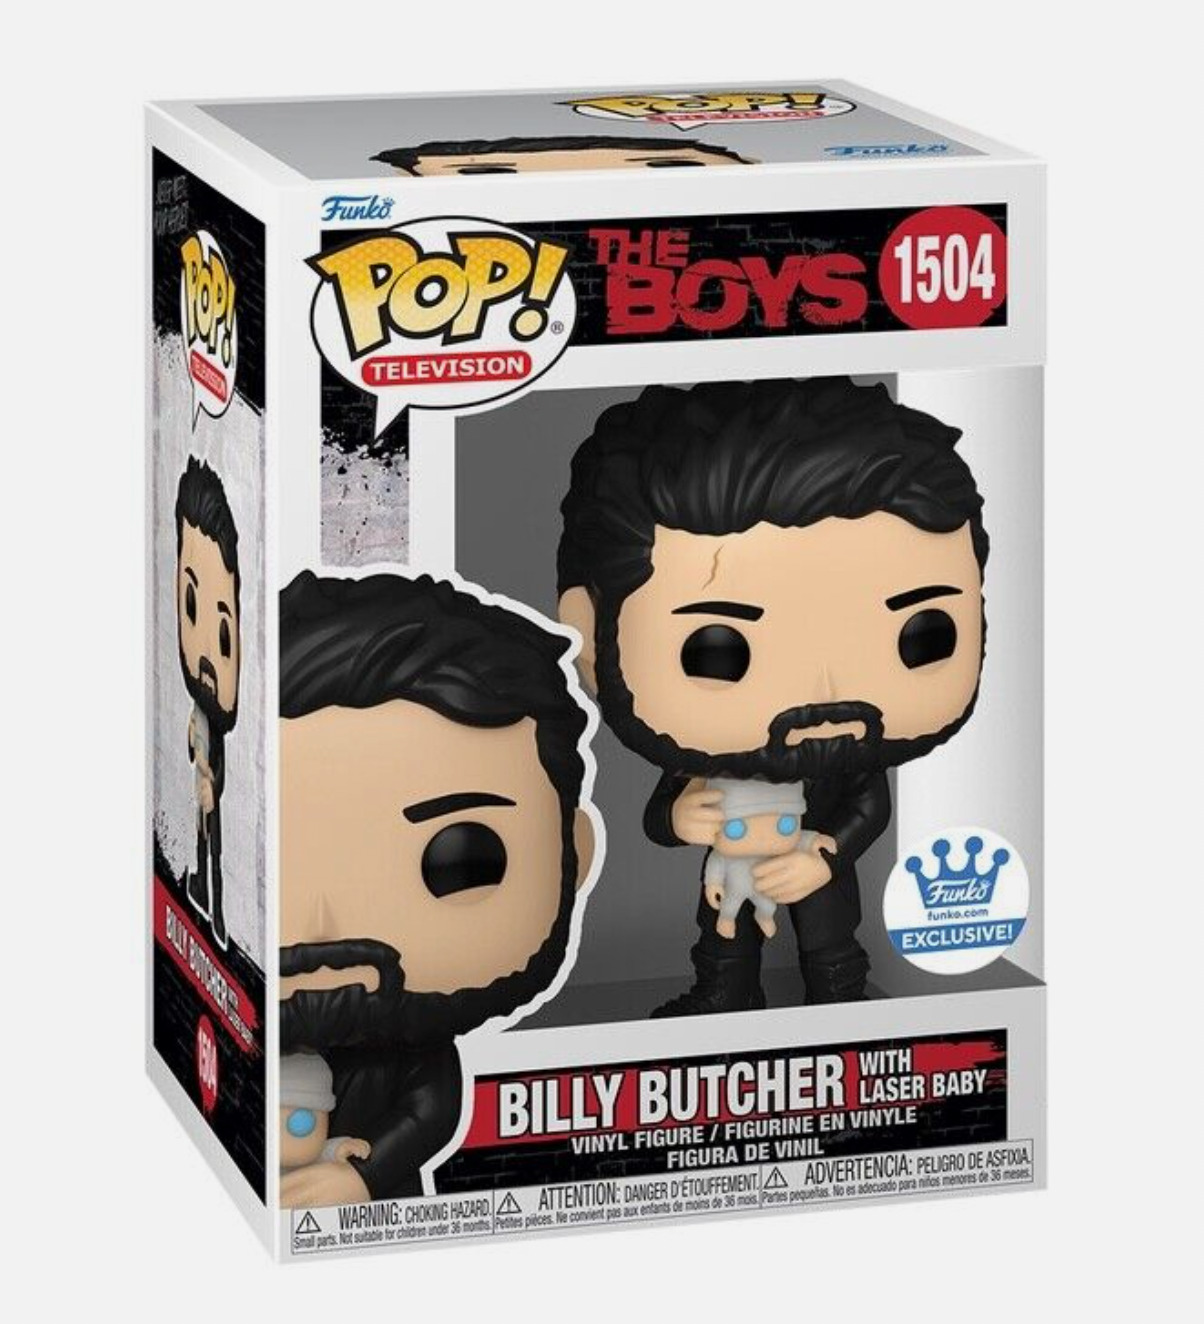 Funko Pop #1504 The Boys Billy Butcher with Laser Baby Funko Shop Ex IN HAND